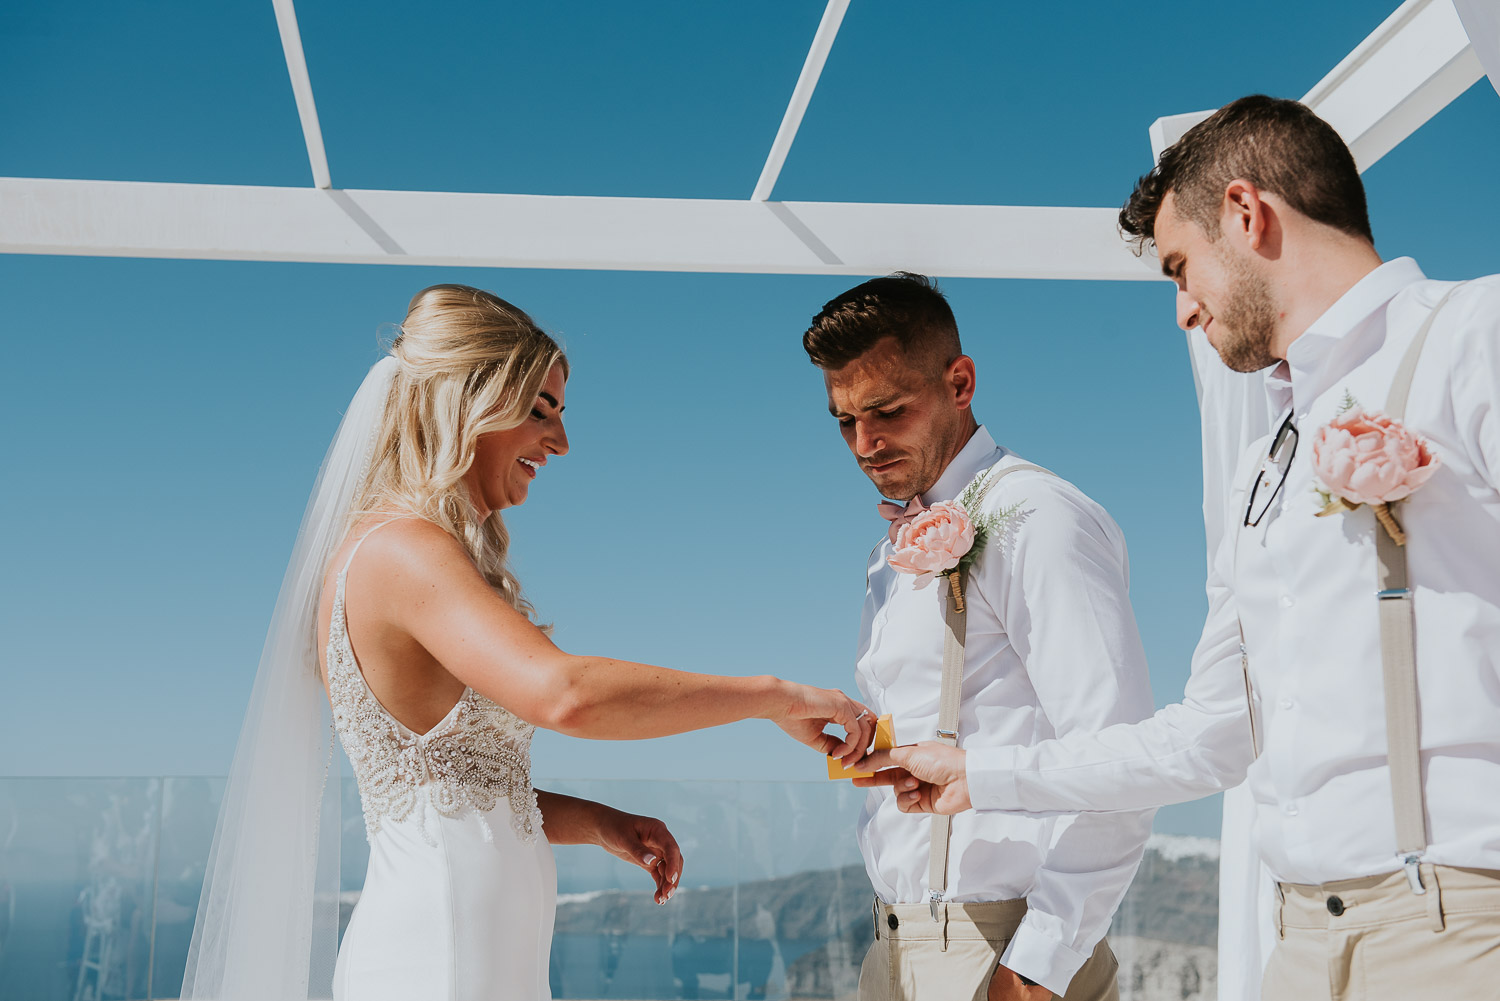 Wedding photographer Santorini: bride smiling as she takes a wedding ring from the best man by Ben and Vesna.